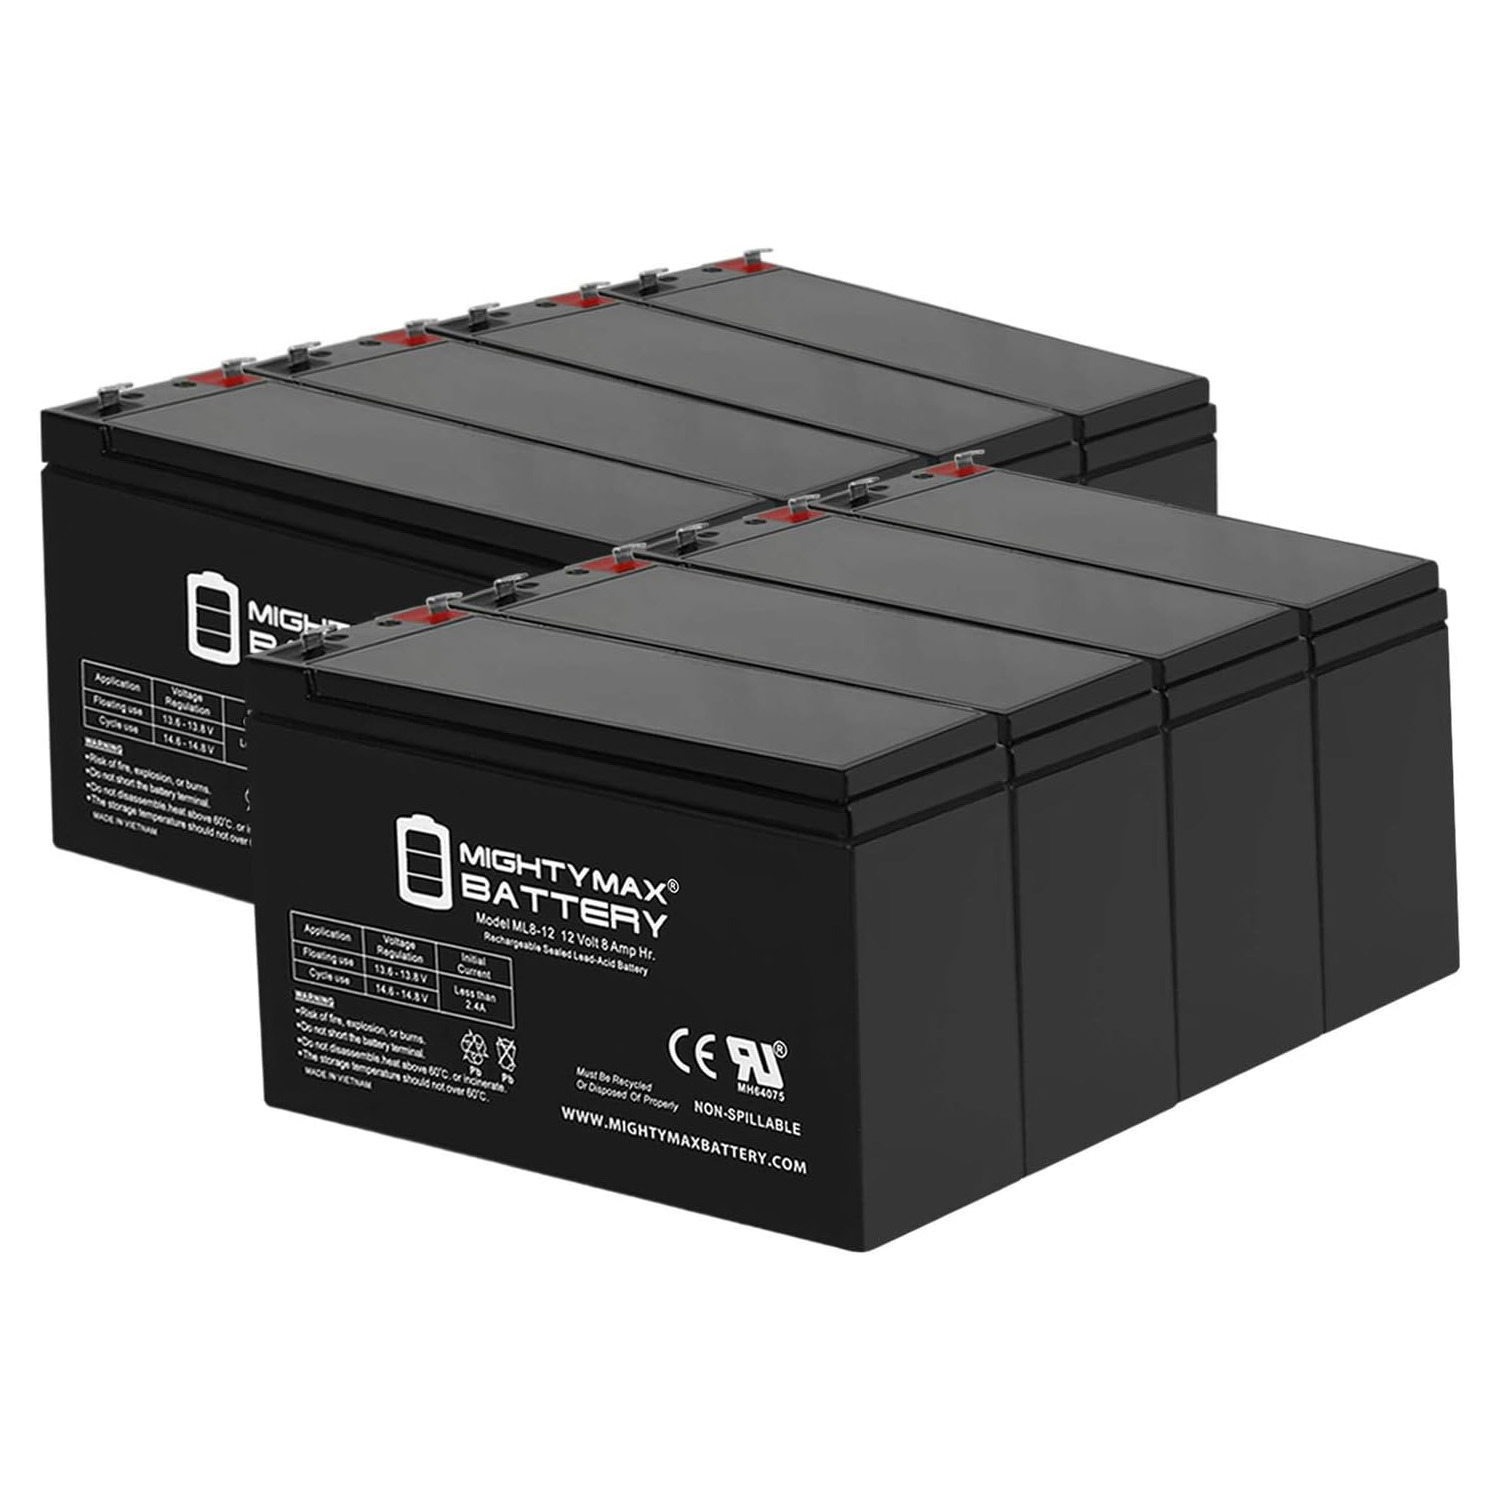 12V 8Ah SLA Replacement Battery compatible with Humminbird 398ci Combo Fishfinder - 8 Pack